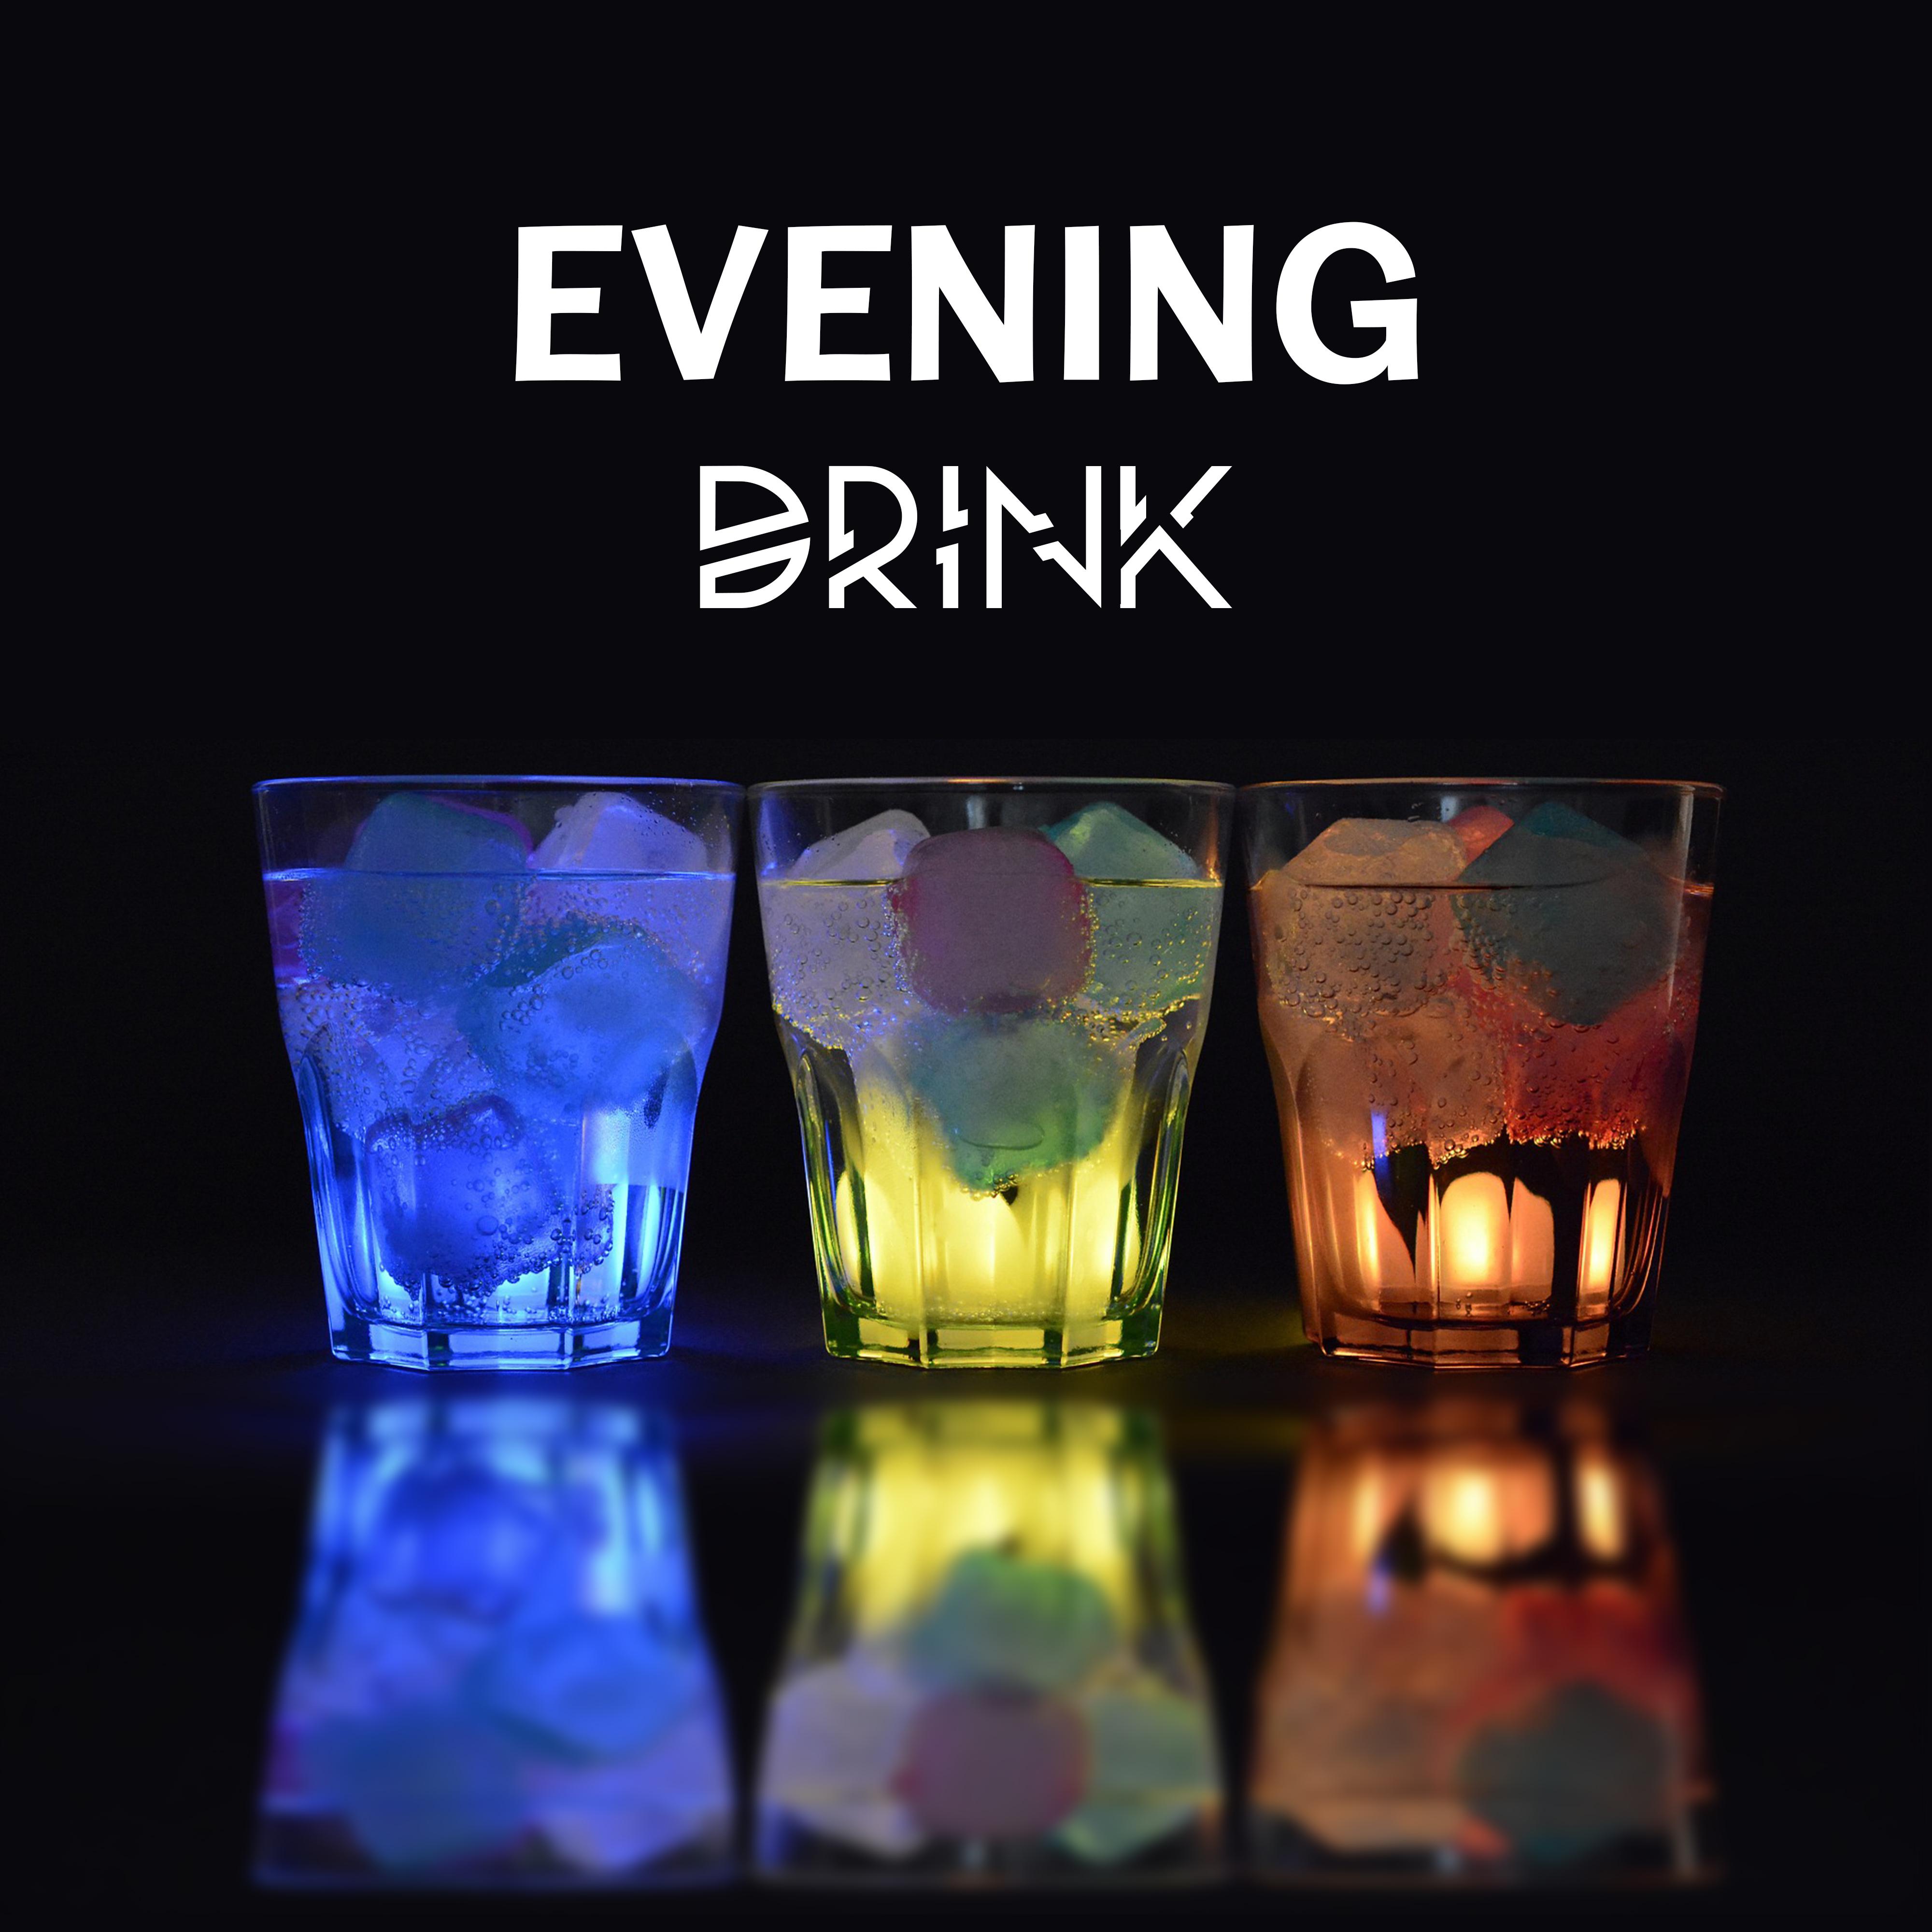 Evening Drink  Best Smooth Jazz for Relaxation, Music at Night, Chillout, Jazz Cafe, Time with Friends, Instrumental Sounds to Rest